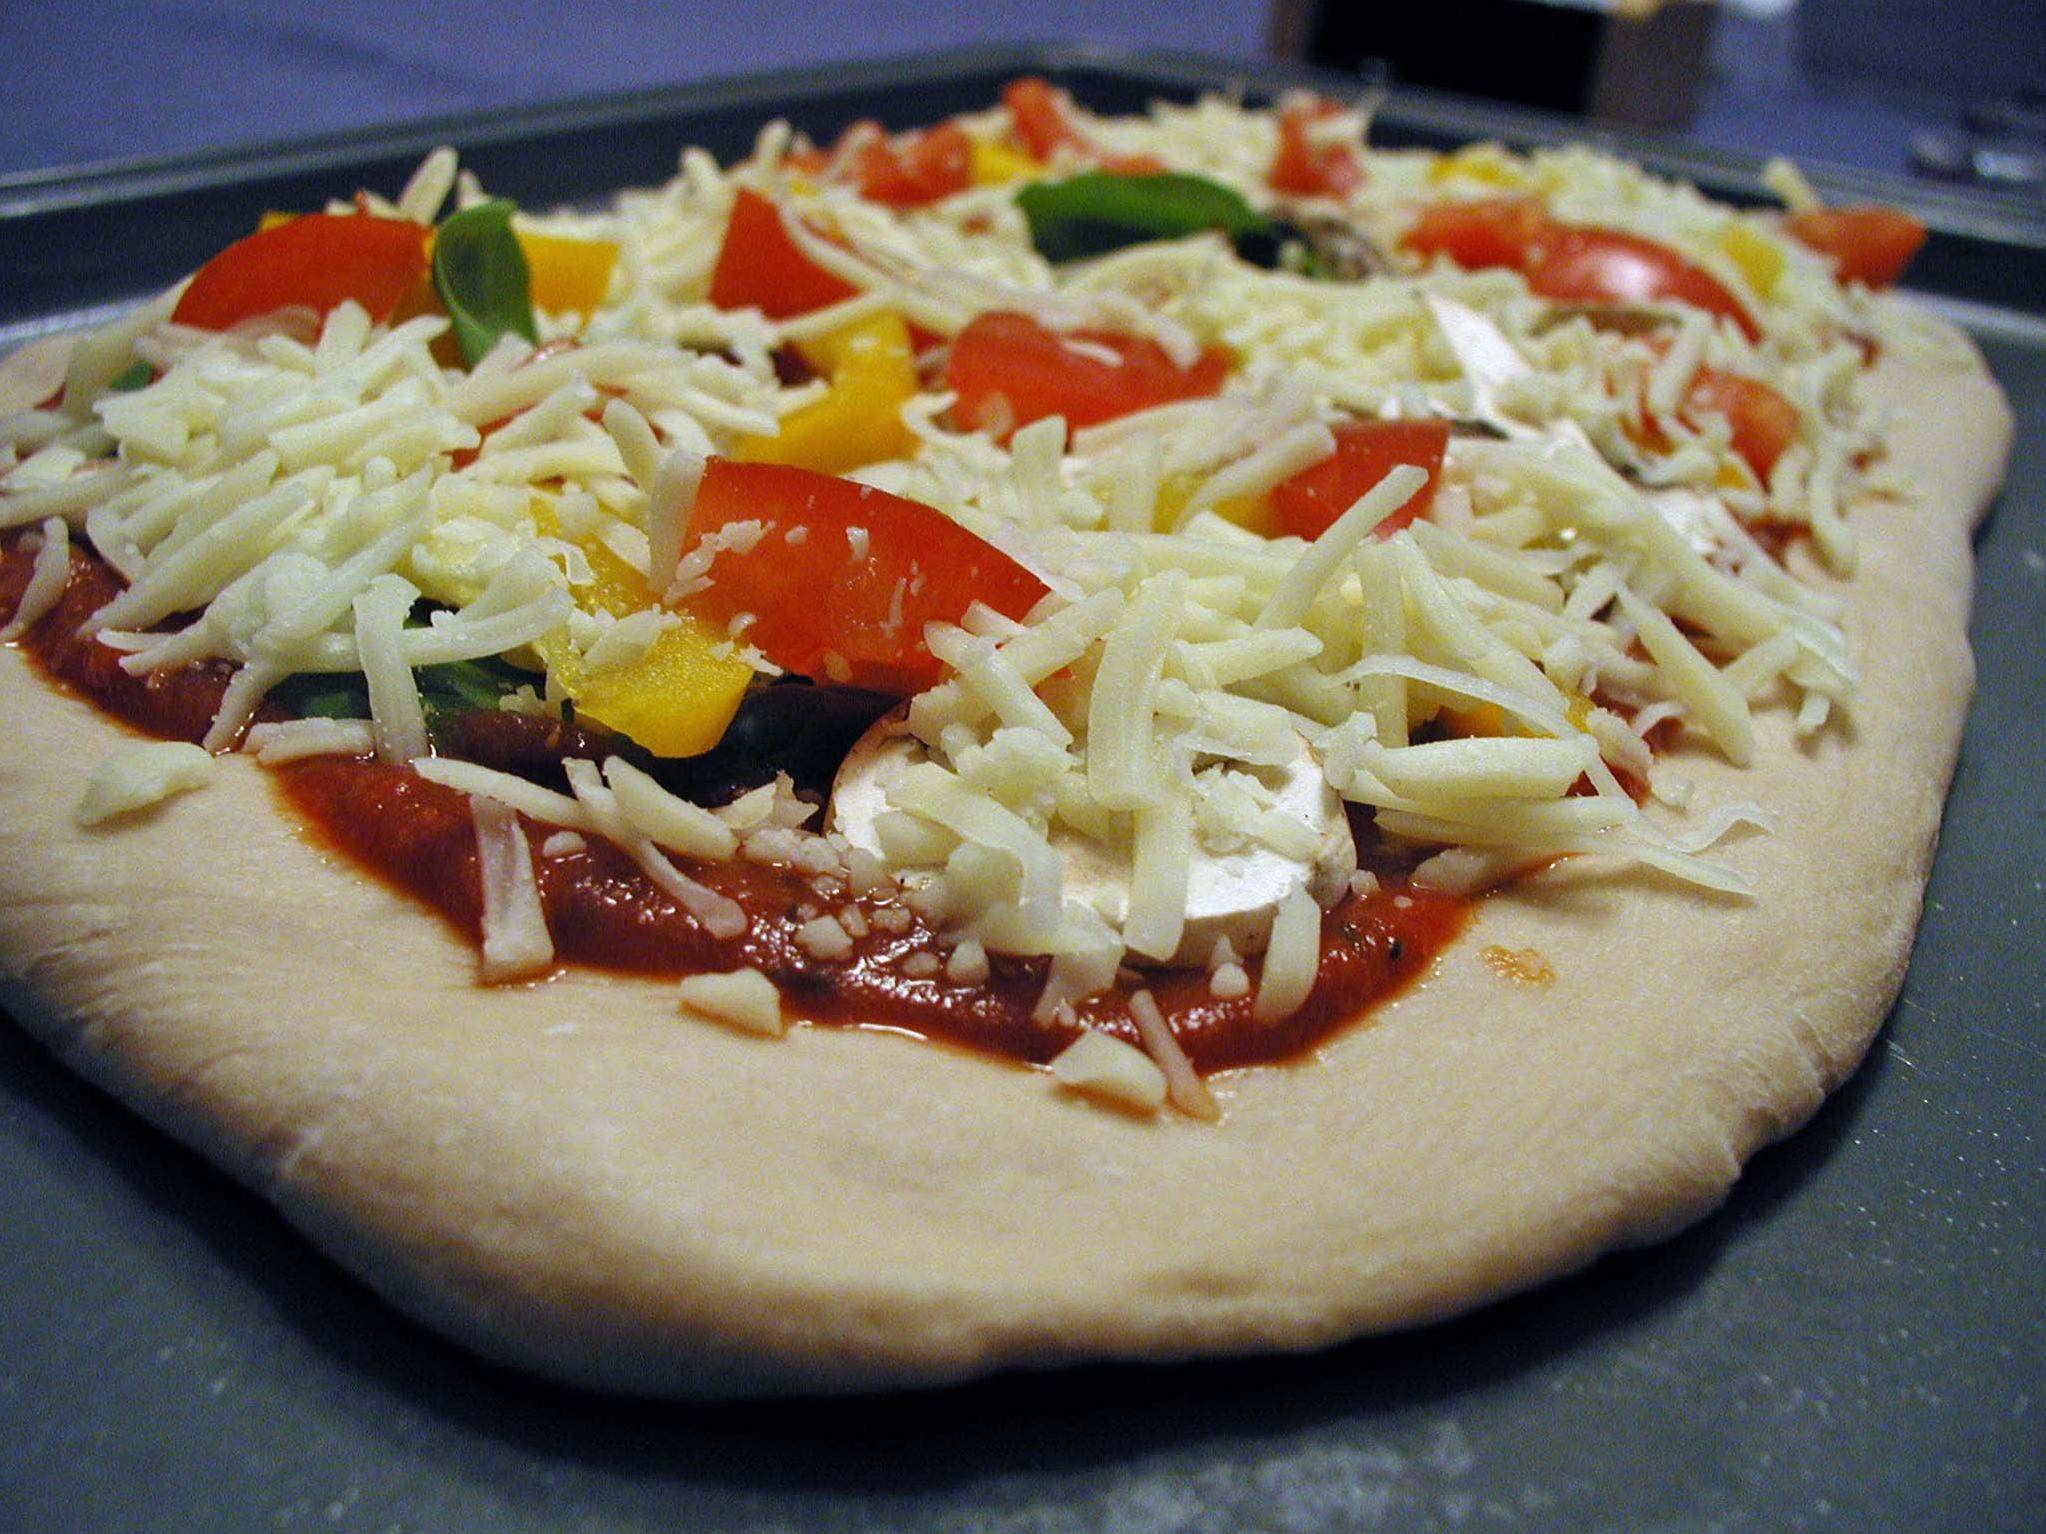  Who says pizza dough can't have a hint of sophistication? Try this recipe and find out!